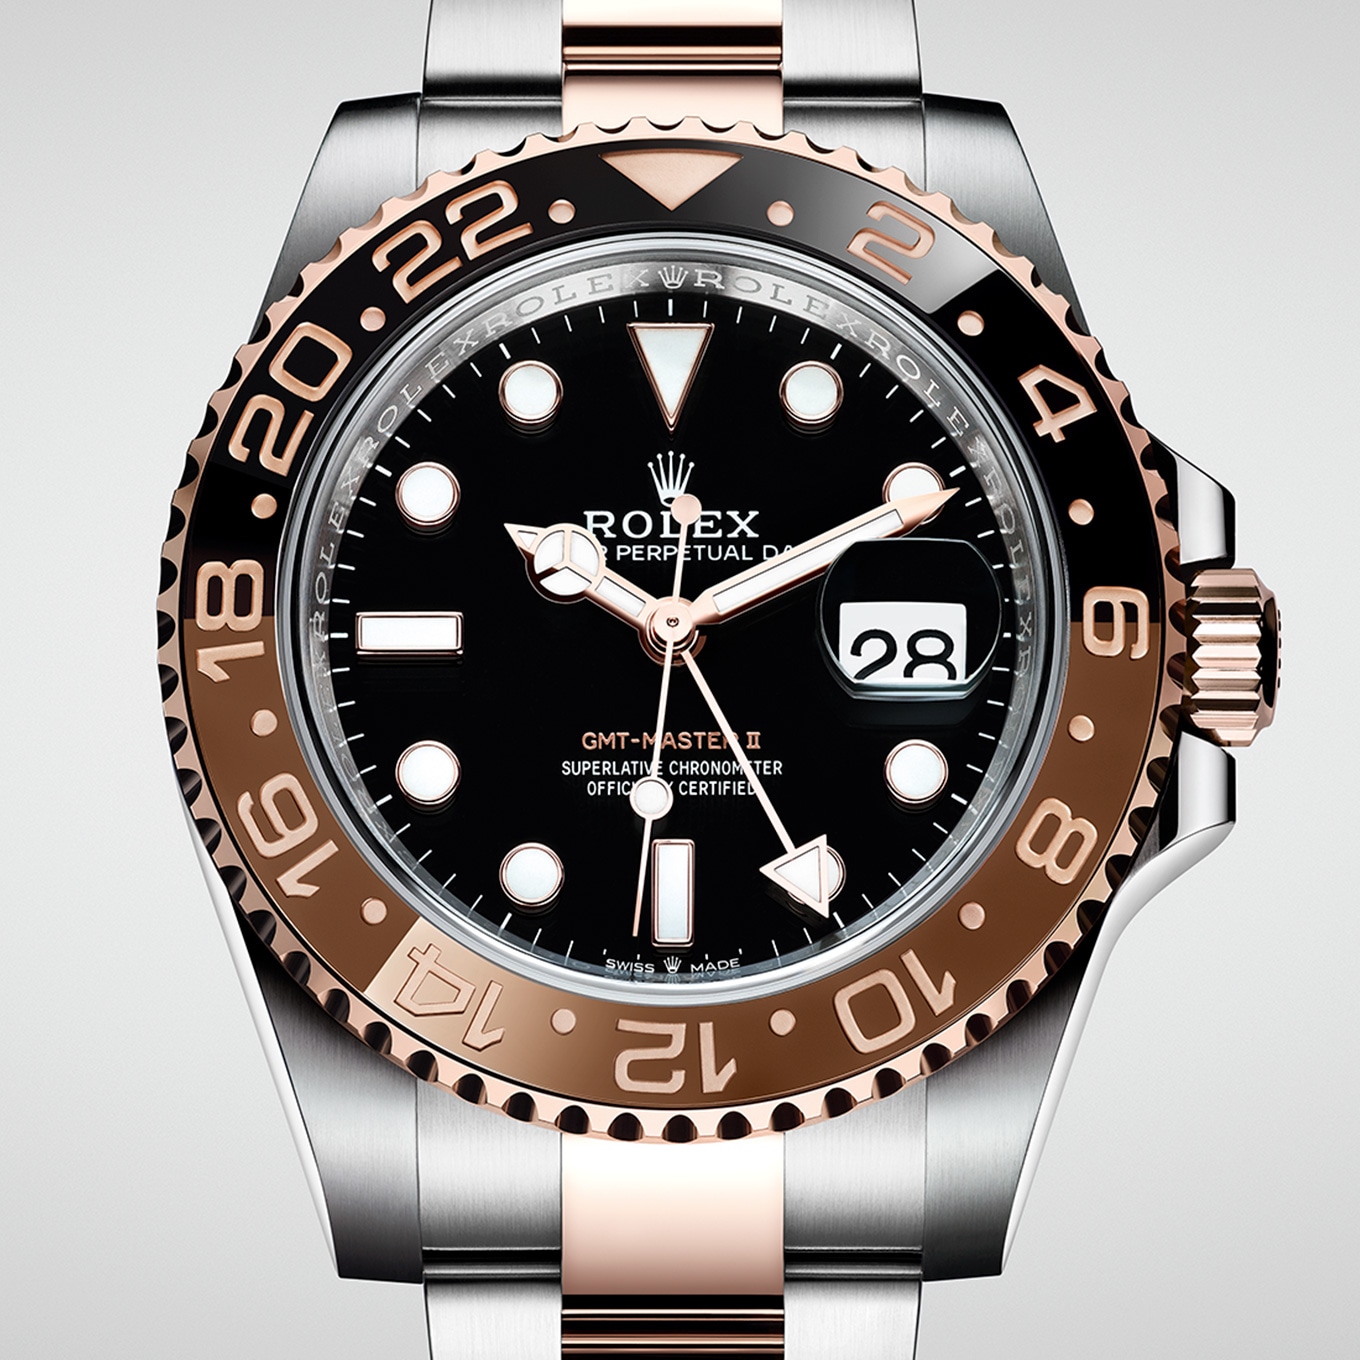 Rolex Oyster Perpetual Ladydate